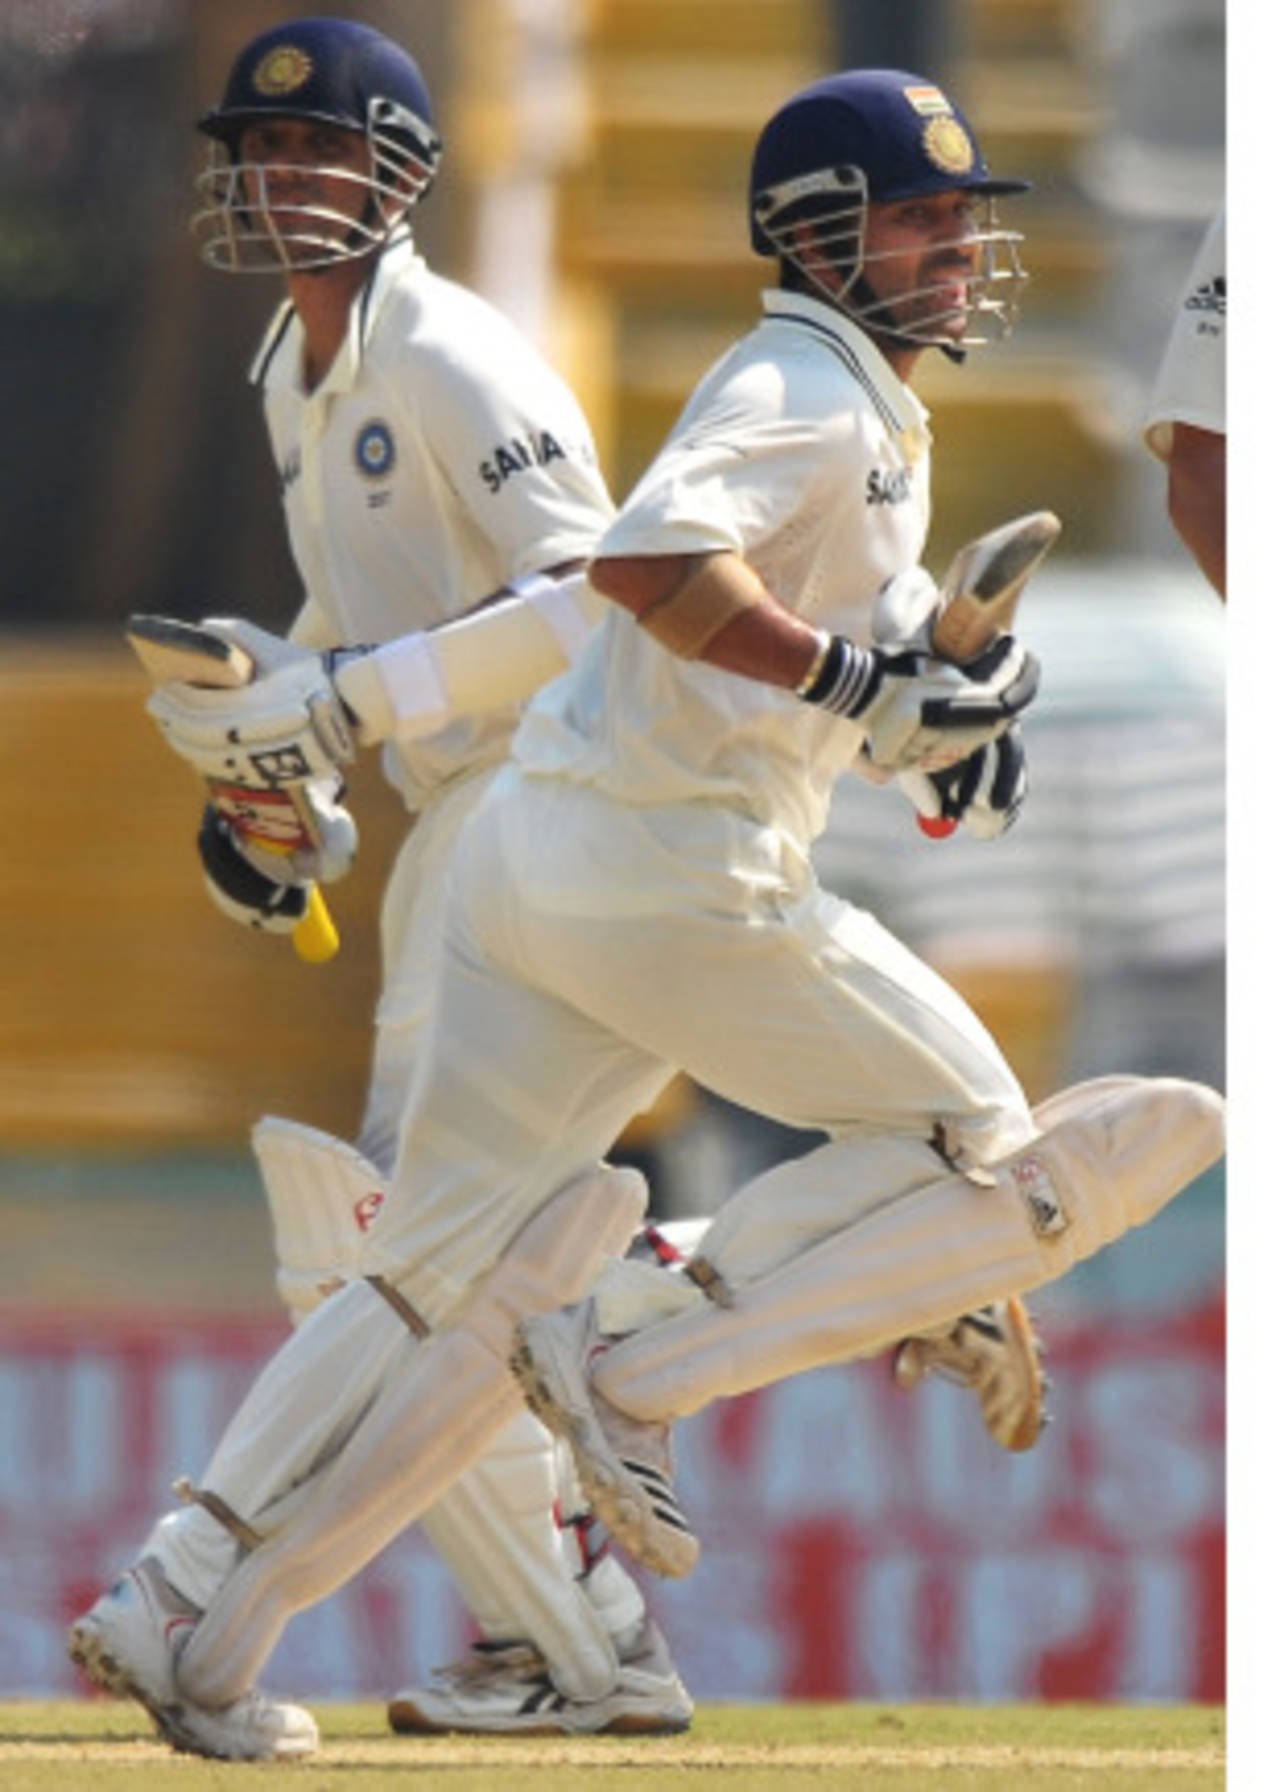 Sachin Tendulkar and Rahul Dravid added 79 for the fourth wicket, India v Australia, 1st Test, Mohali, 3rd day, October 3, 2010